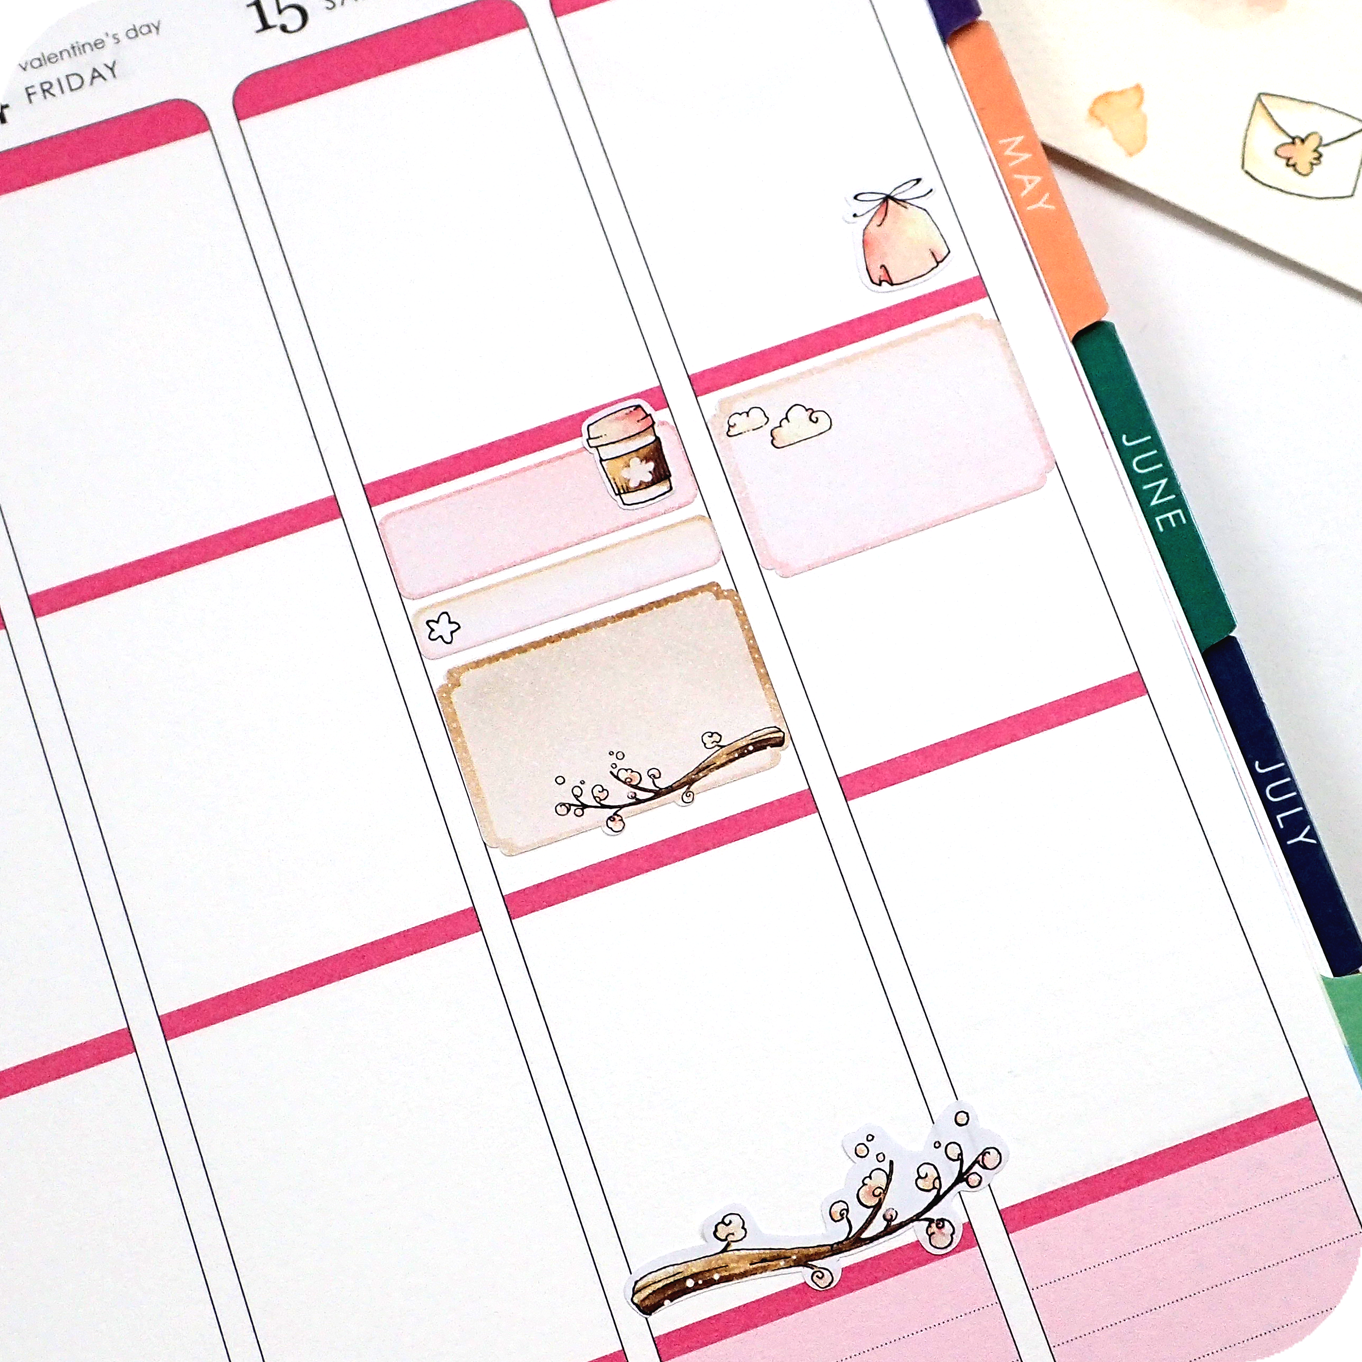 Planner Stickers House chores